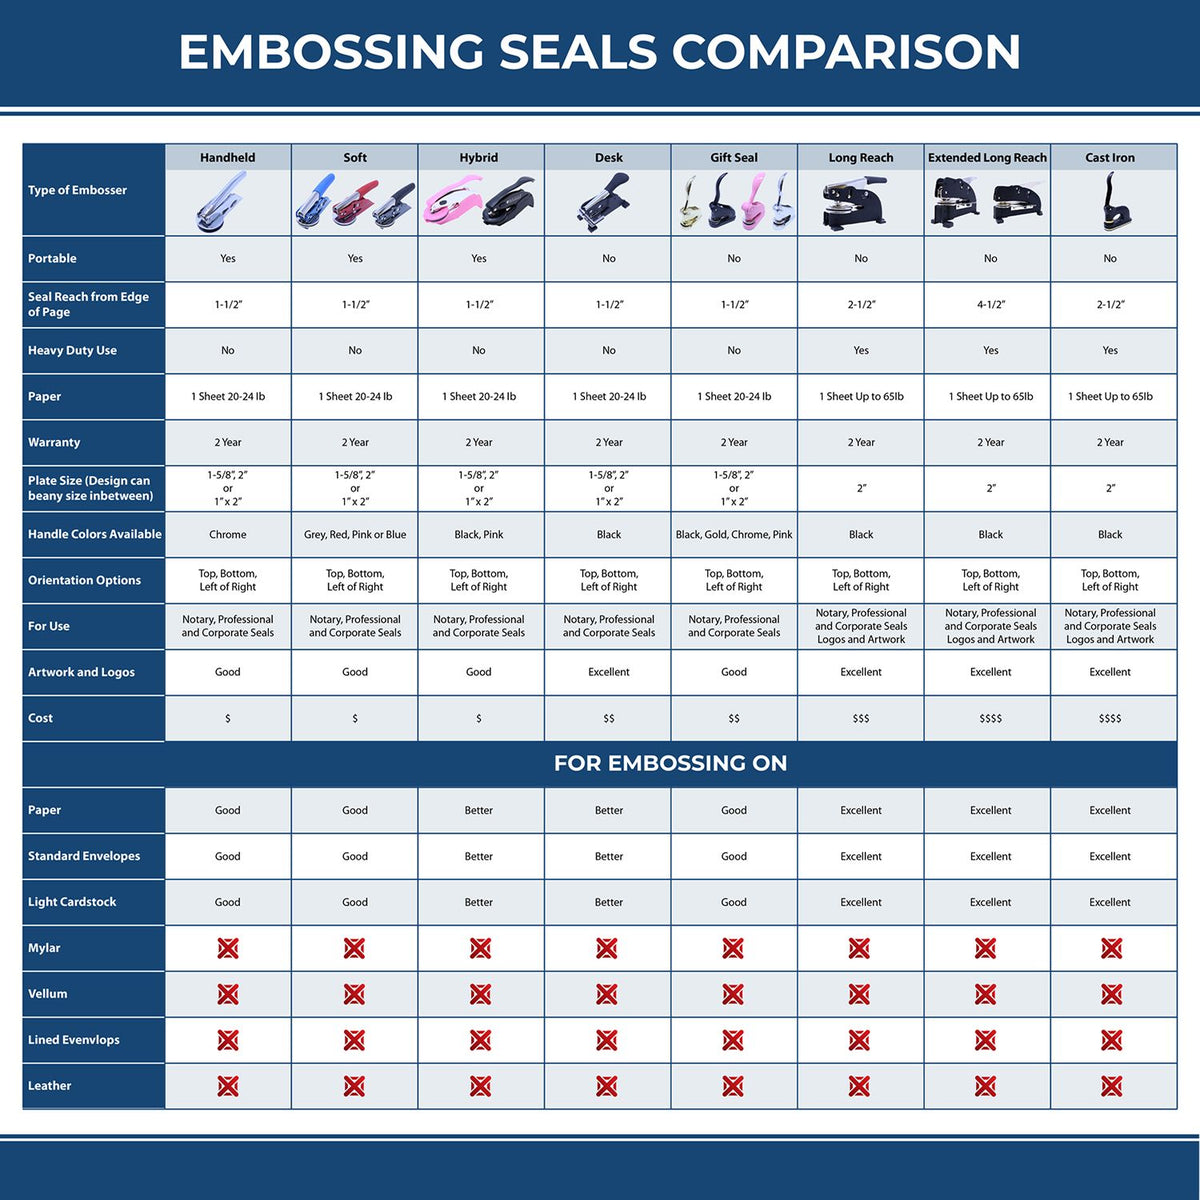 A comparison chart for the different types of mount models available for the Illinois Desk Architect Embossing Seal.